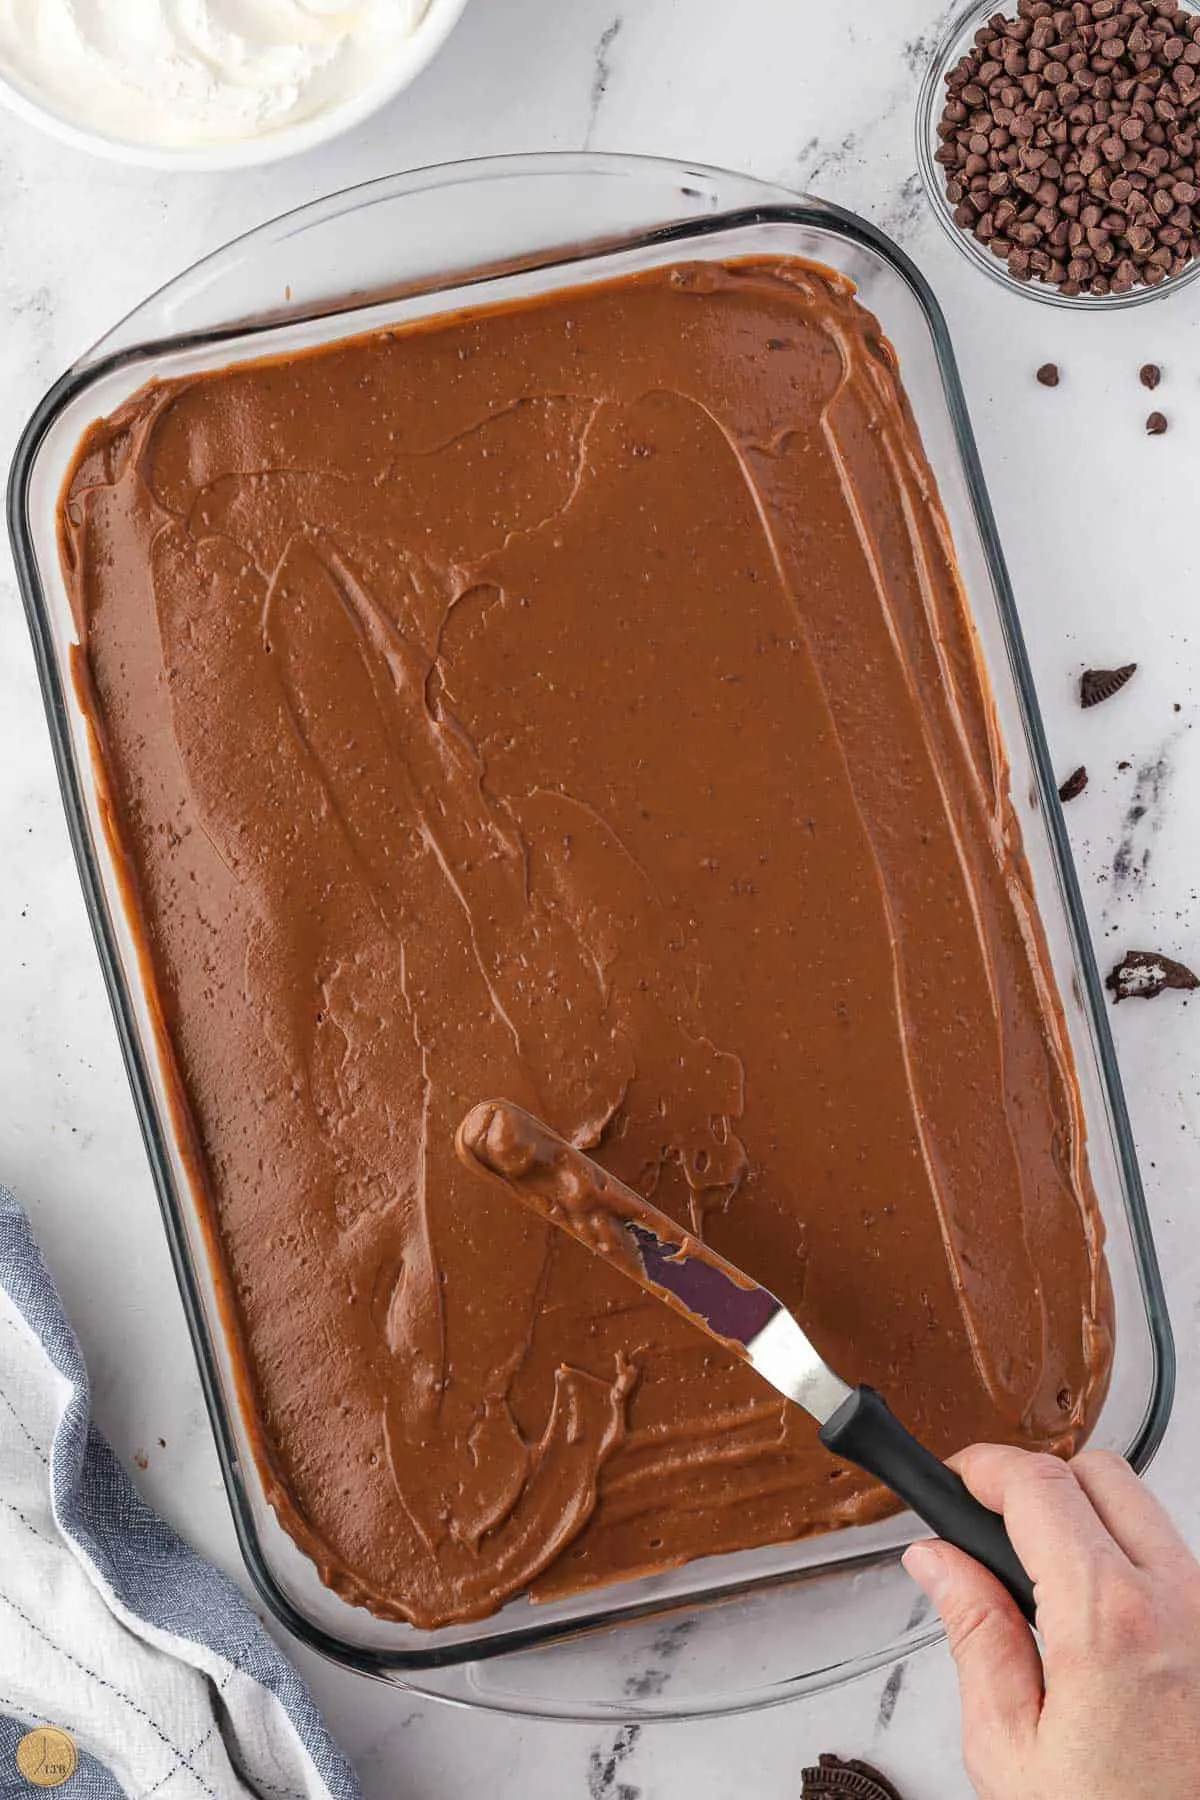 offset spatula on a layer of chocolate pudding